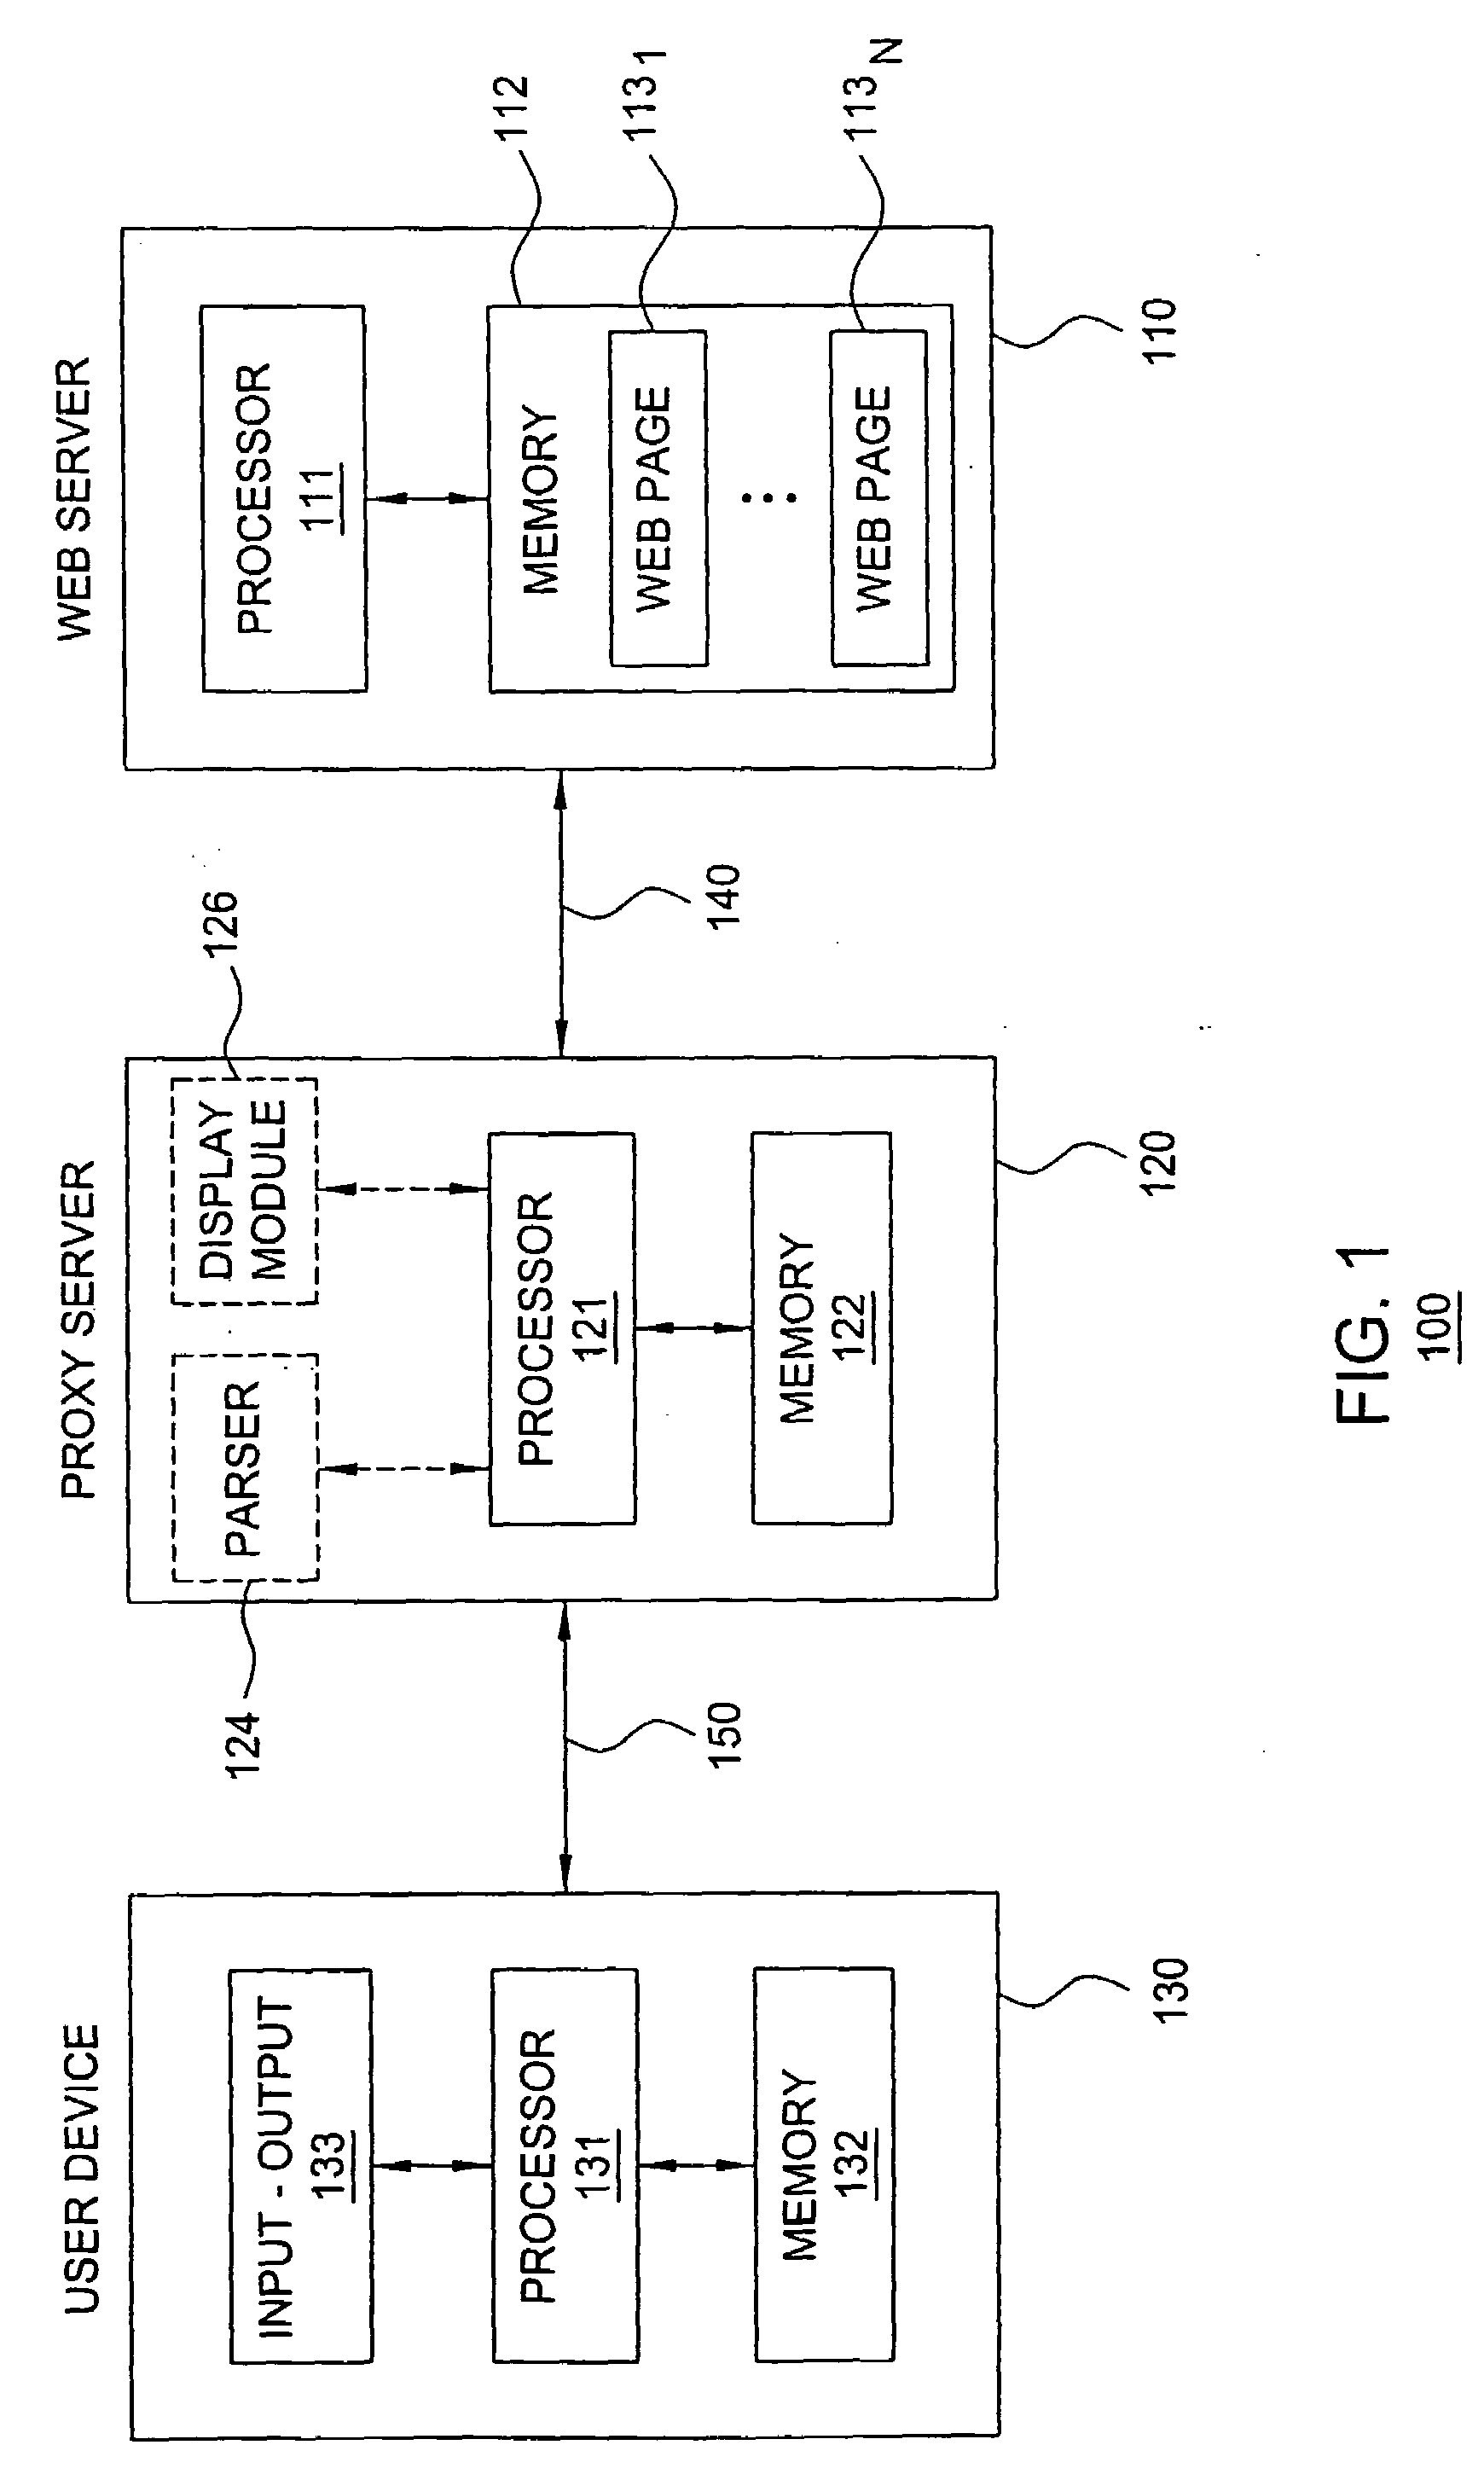 Method and apparatus for secure web browsing